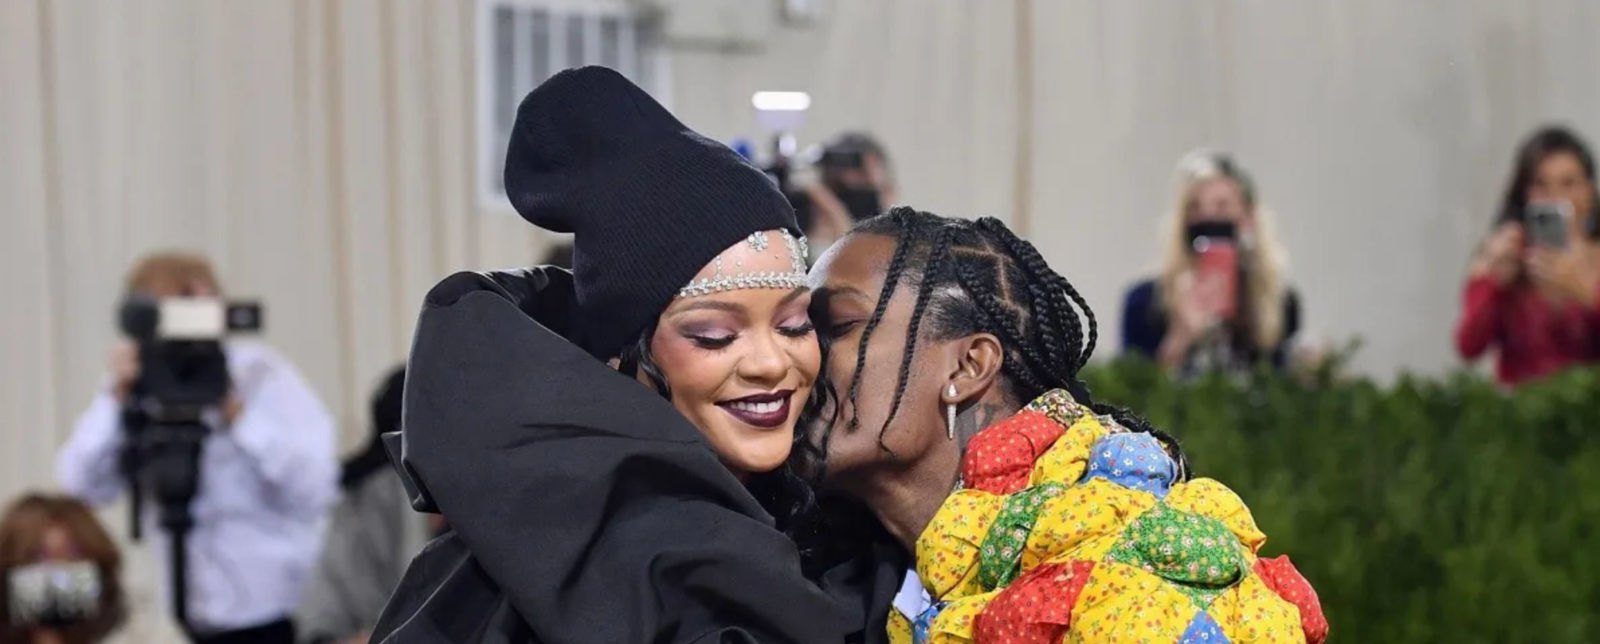 Rihanna and ASAP Rocky have welcomed their first child, a baby boy